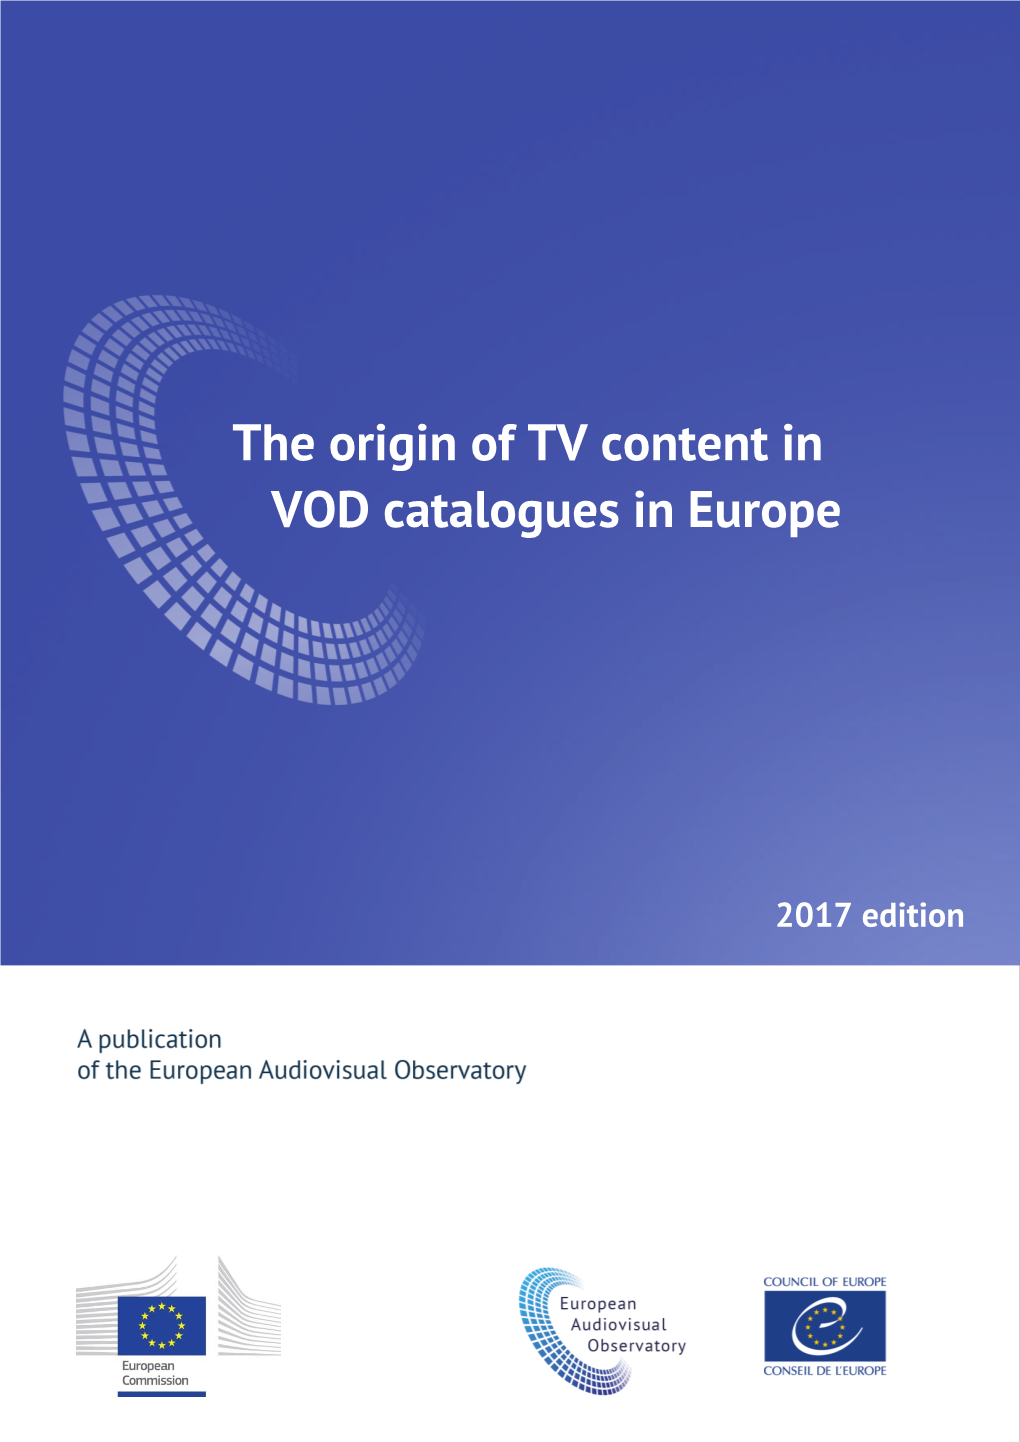 The Origin of TV Content in VOD Catalogues in Europe